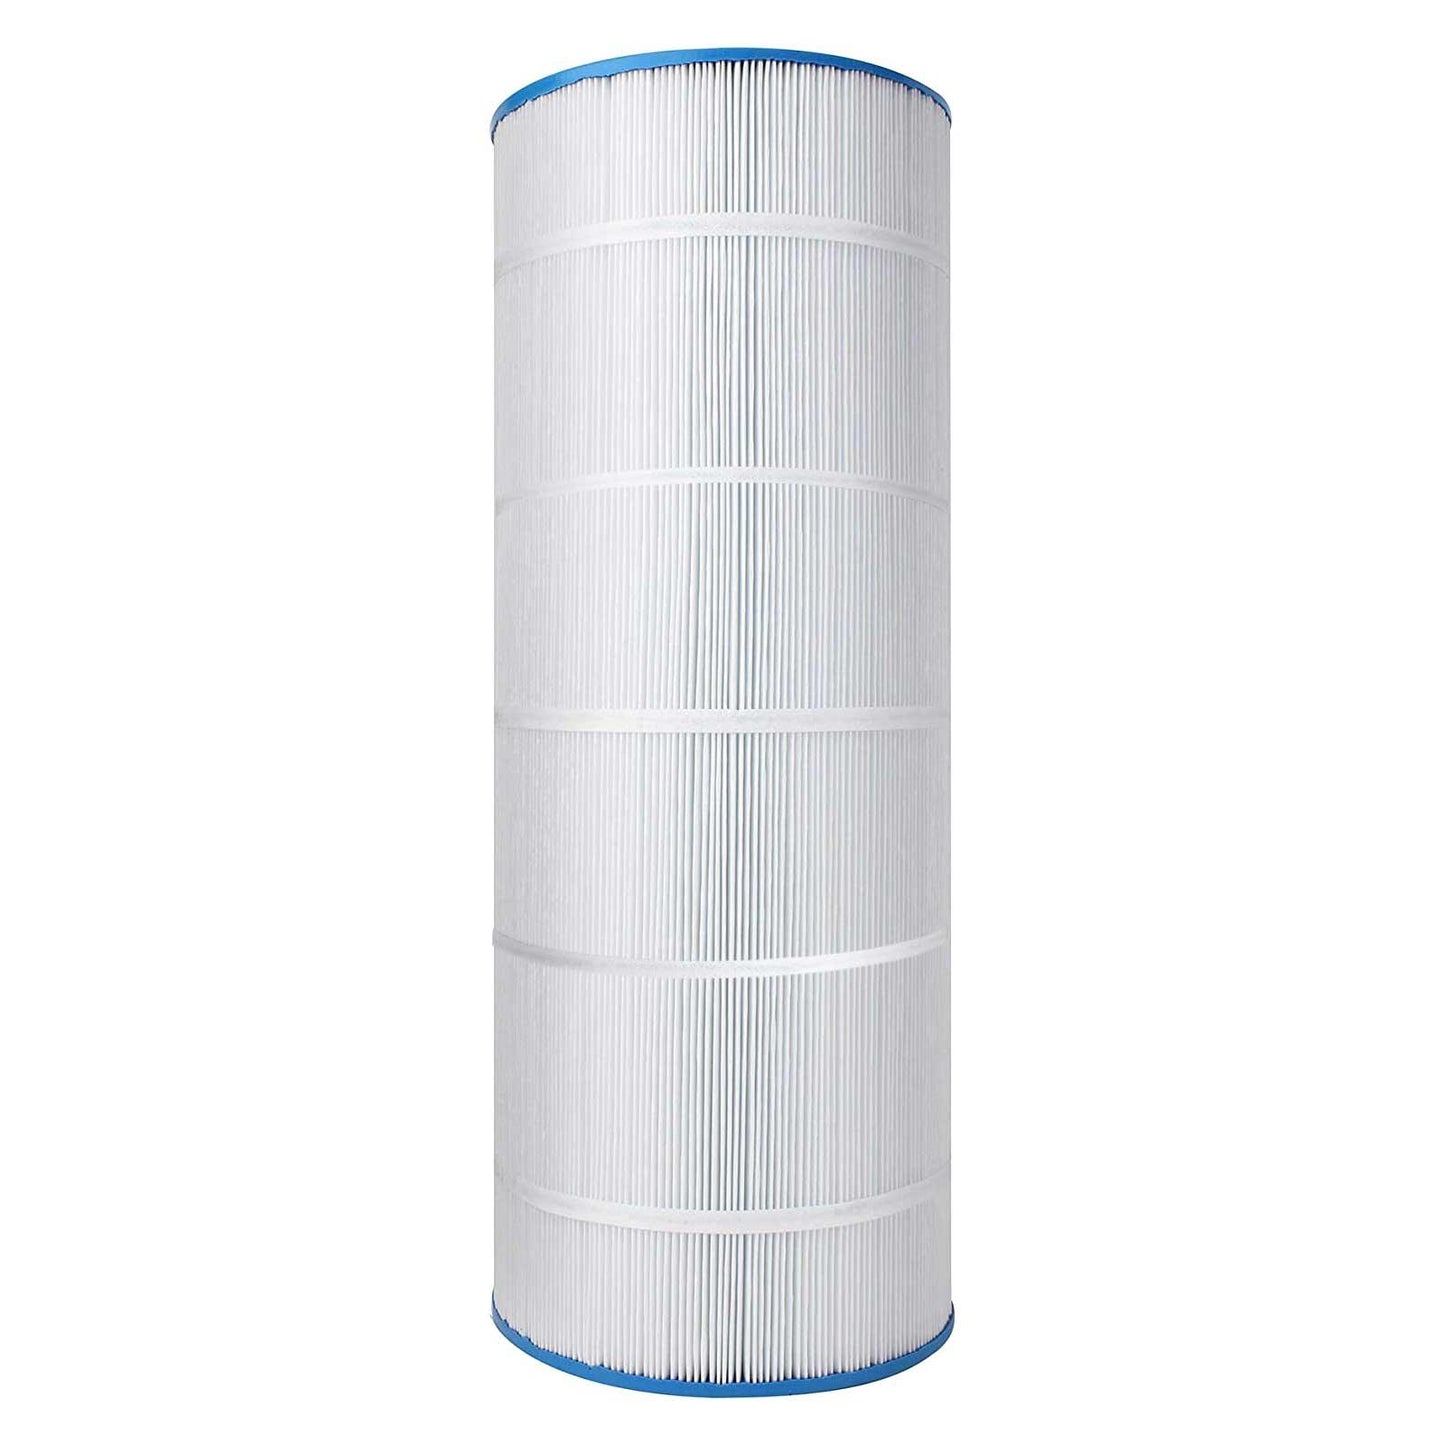 Waterco Trimline CC100 Filter Cartridge Replacements 62050 Sparesbarn